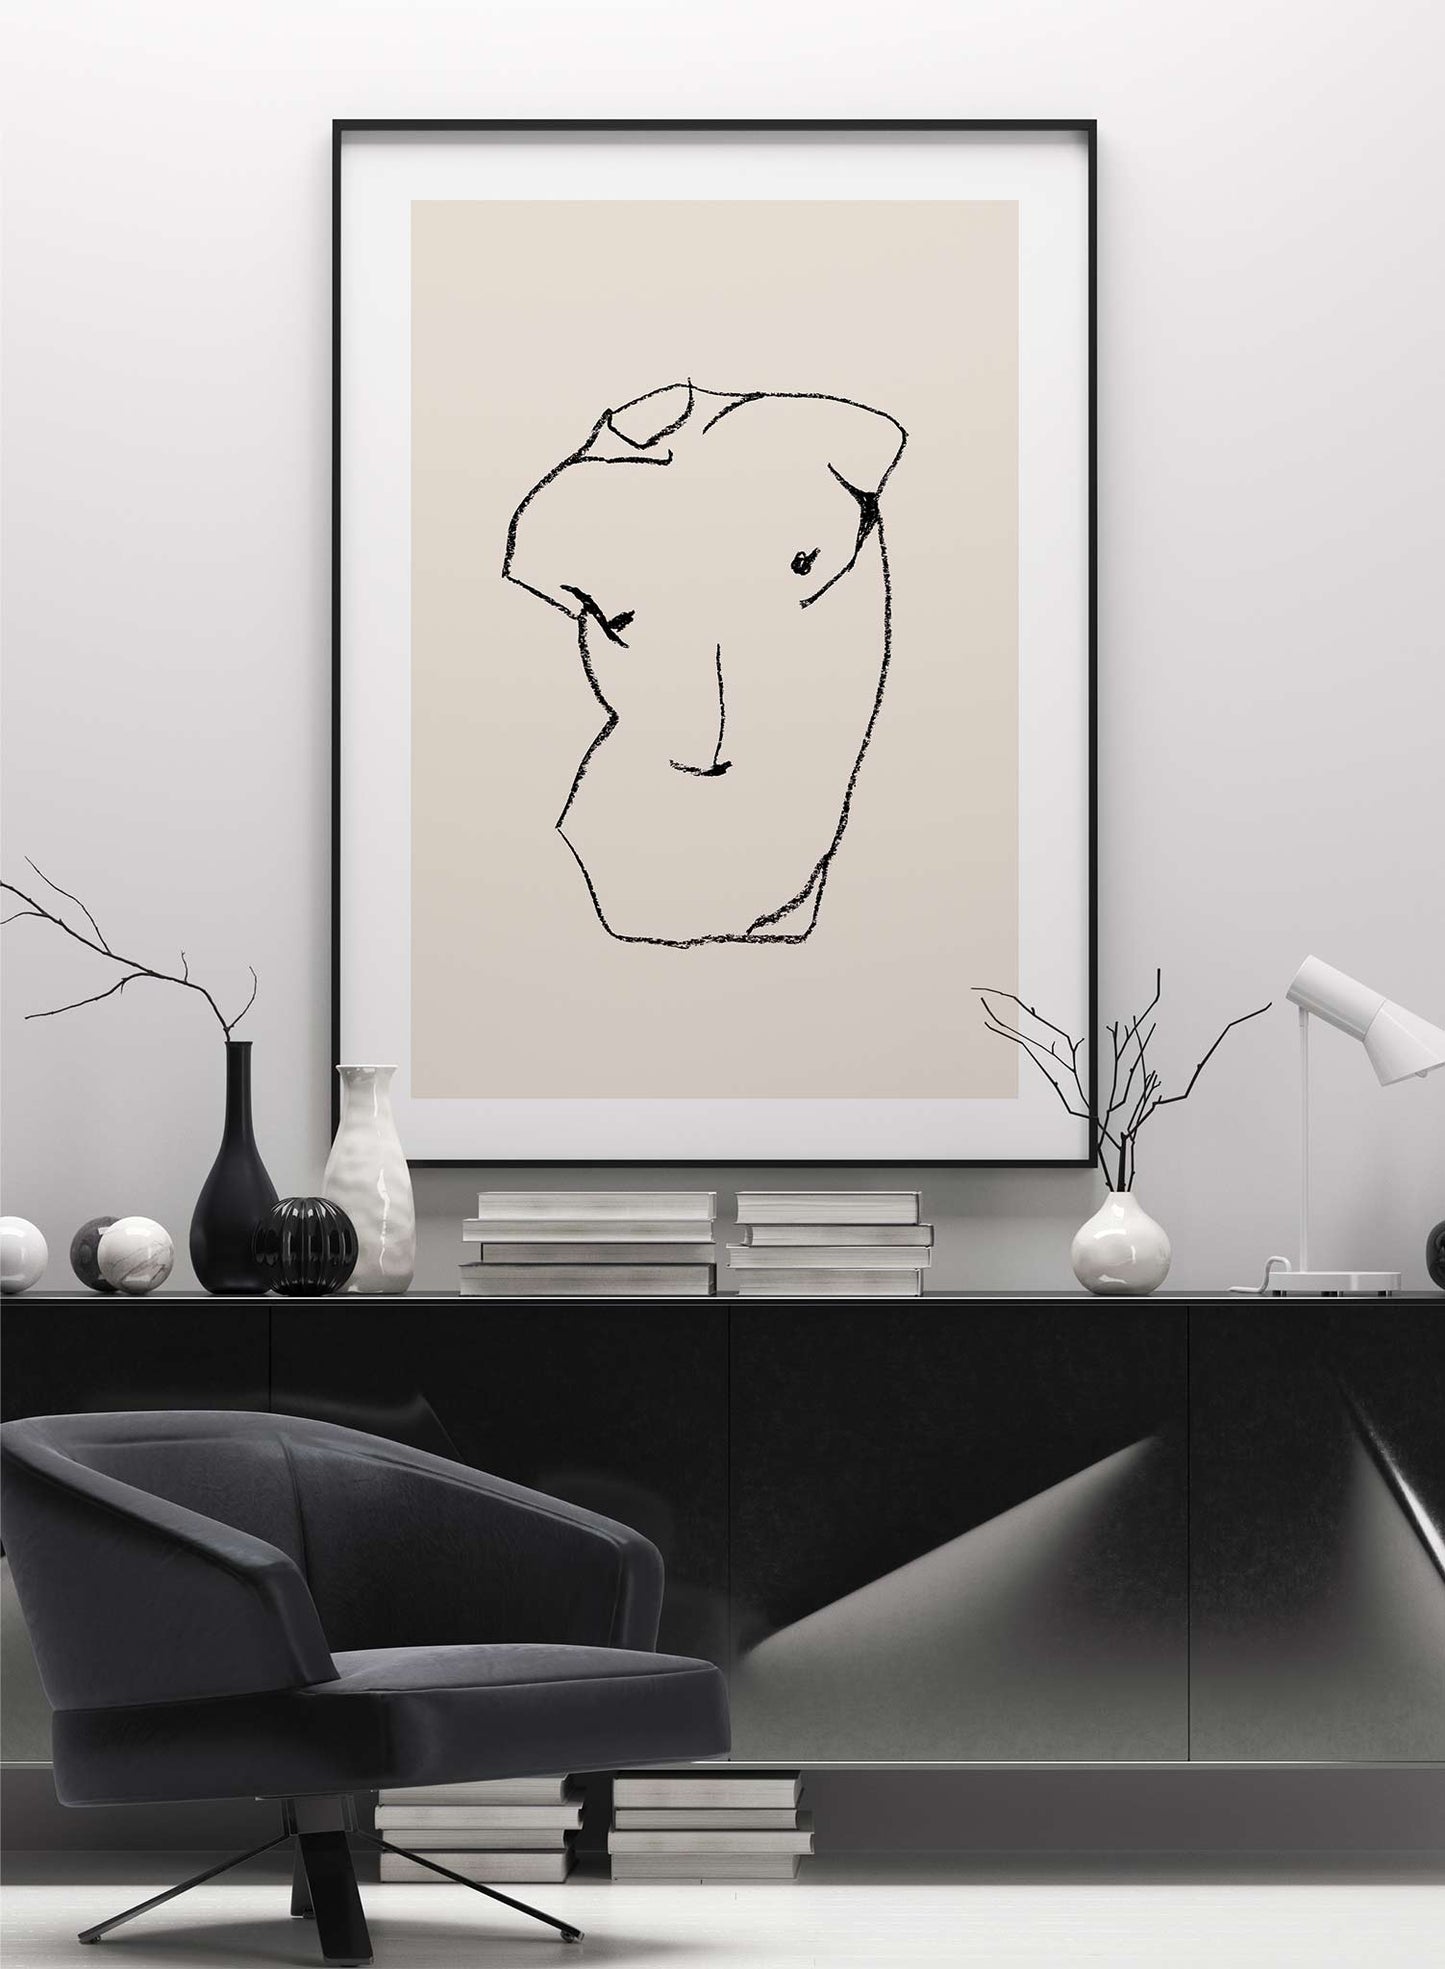 Statuesque is a line art illustration of a chiseled man's chest resembling a statue by Opposite Wall.